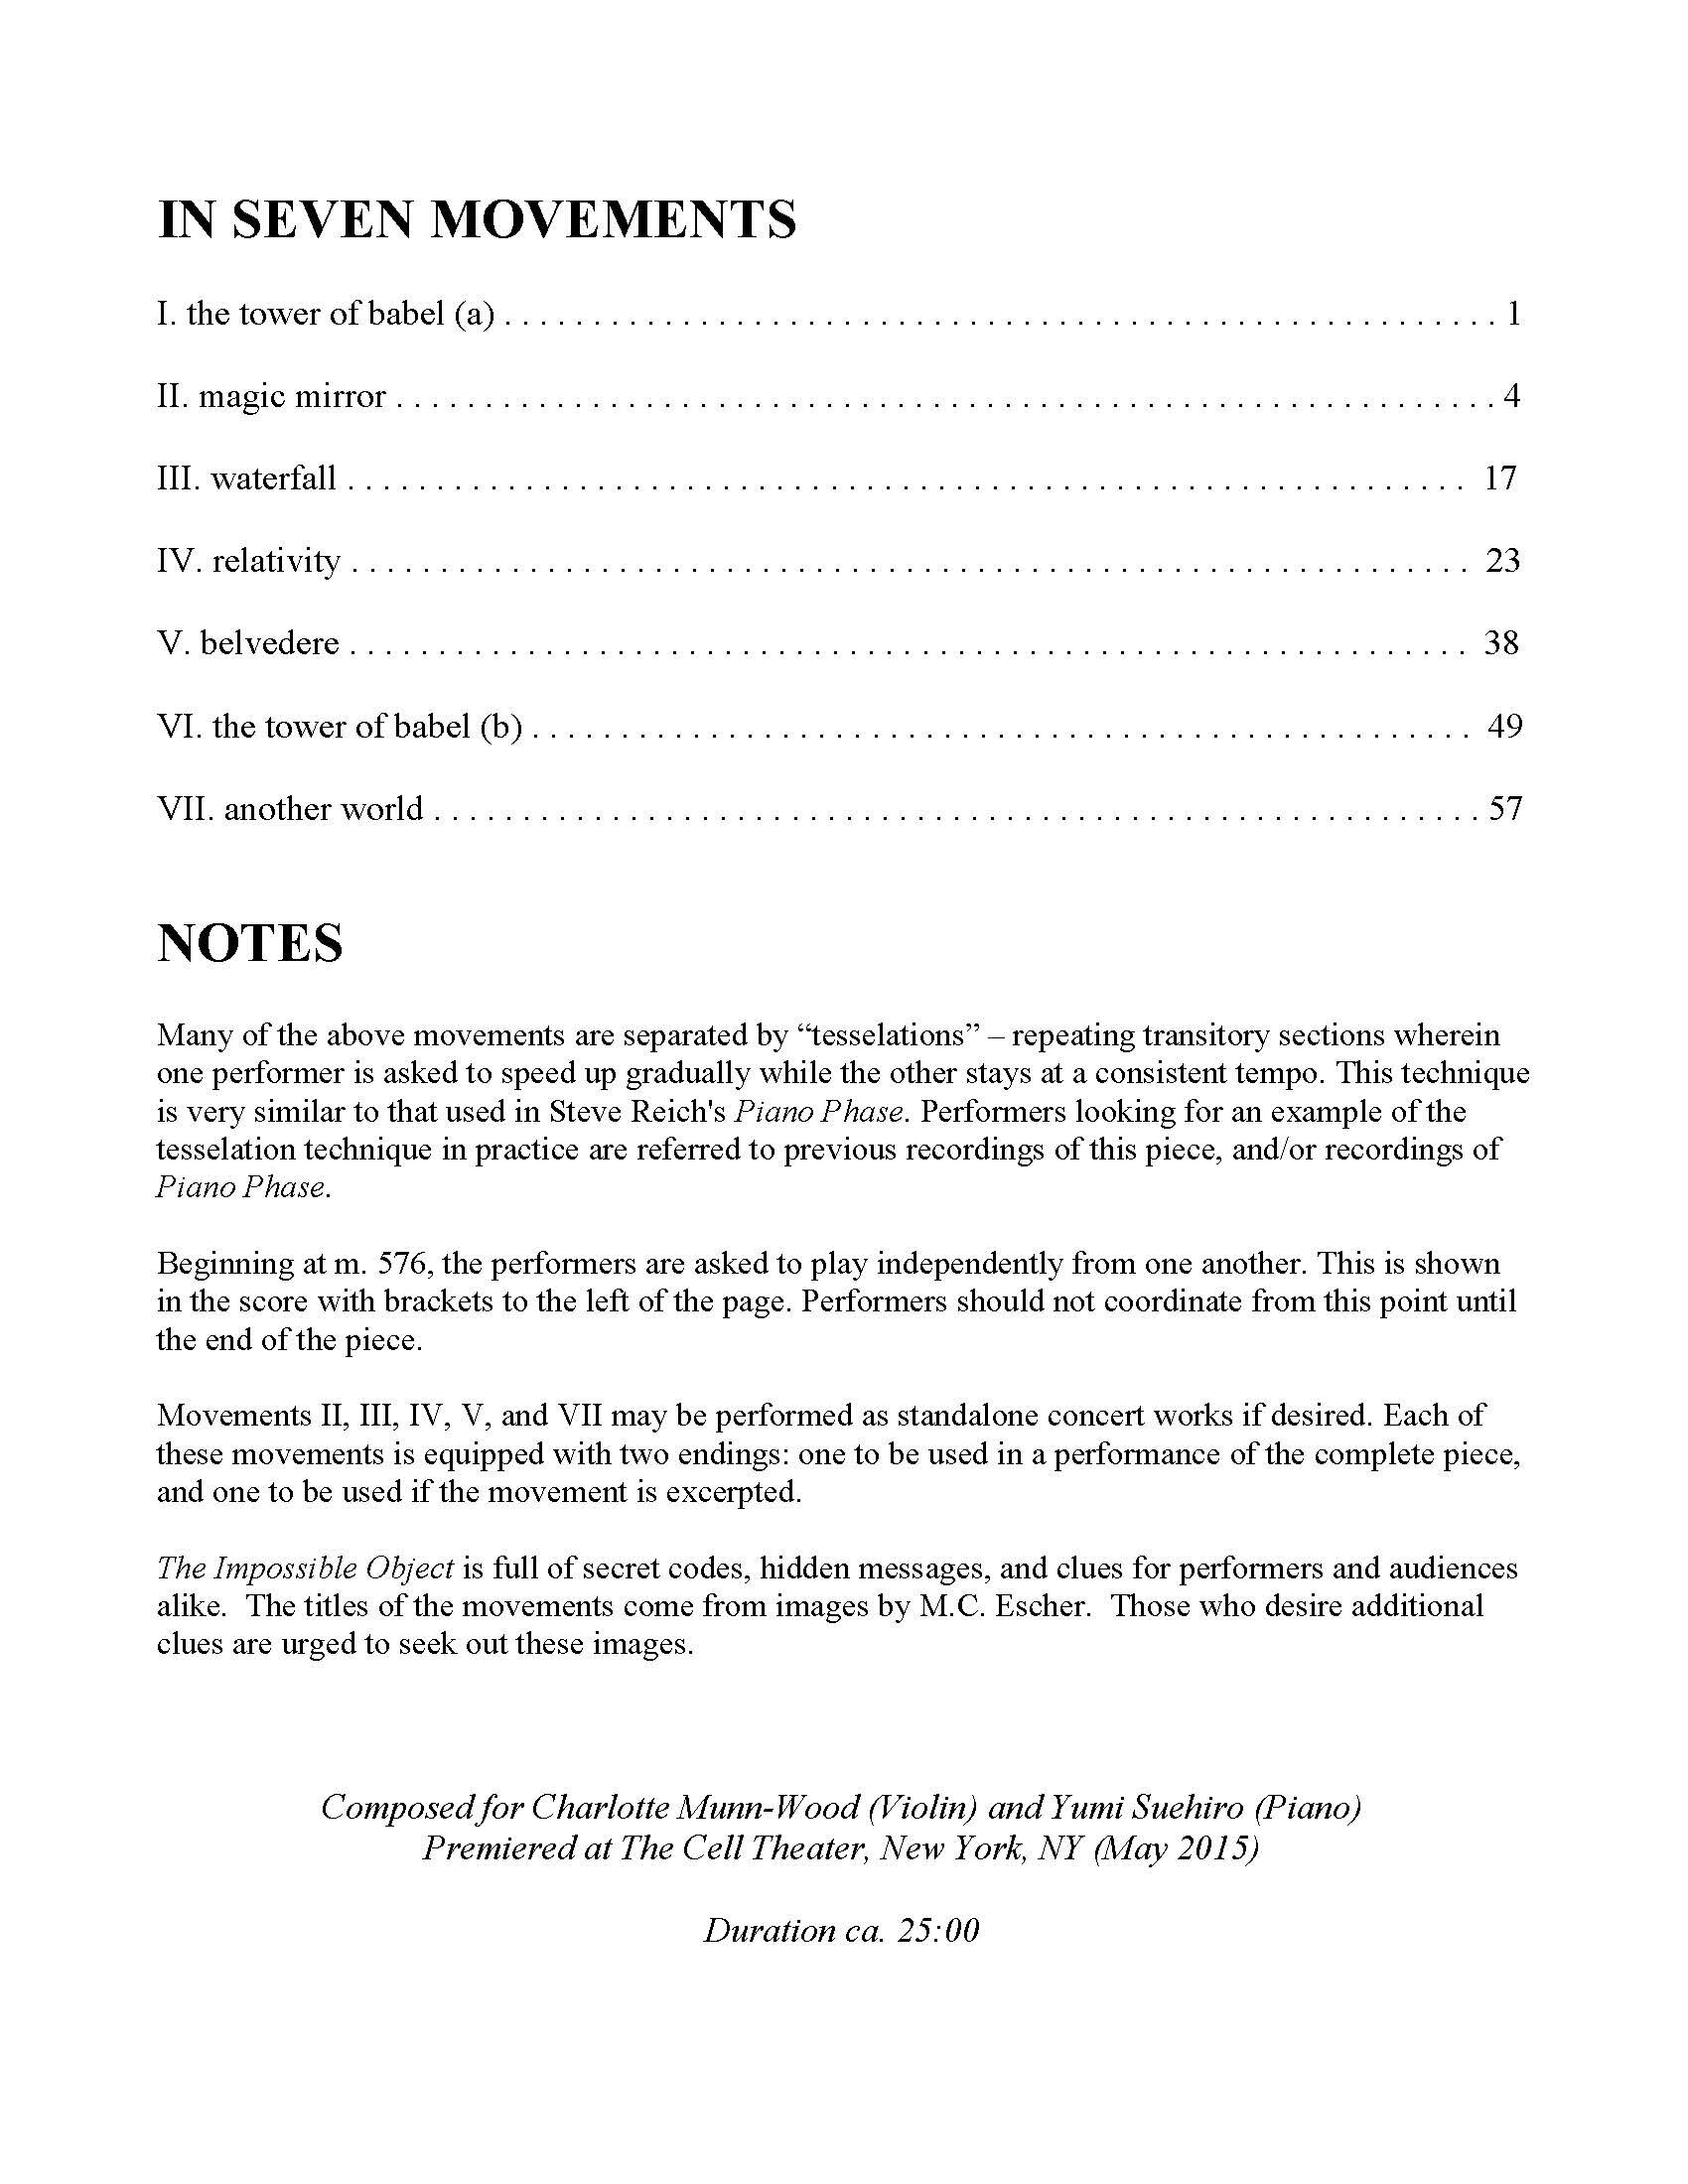 The Impossible Object - Complete Score_Page_05.jpg